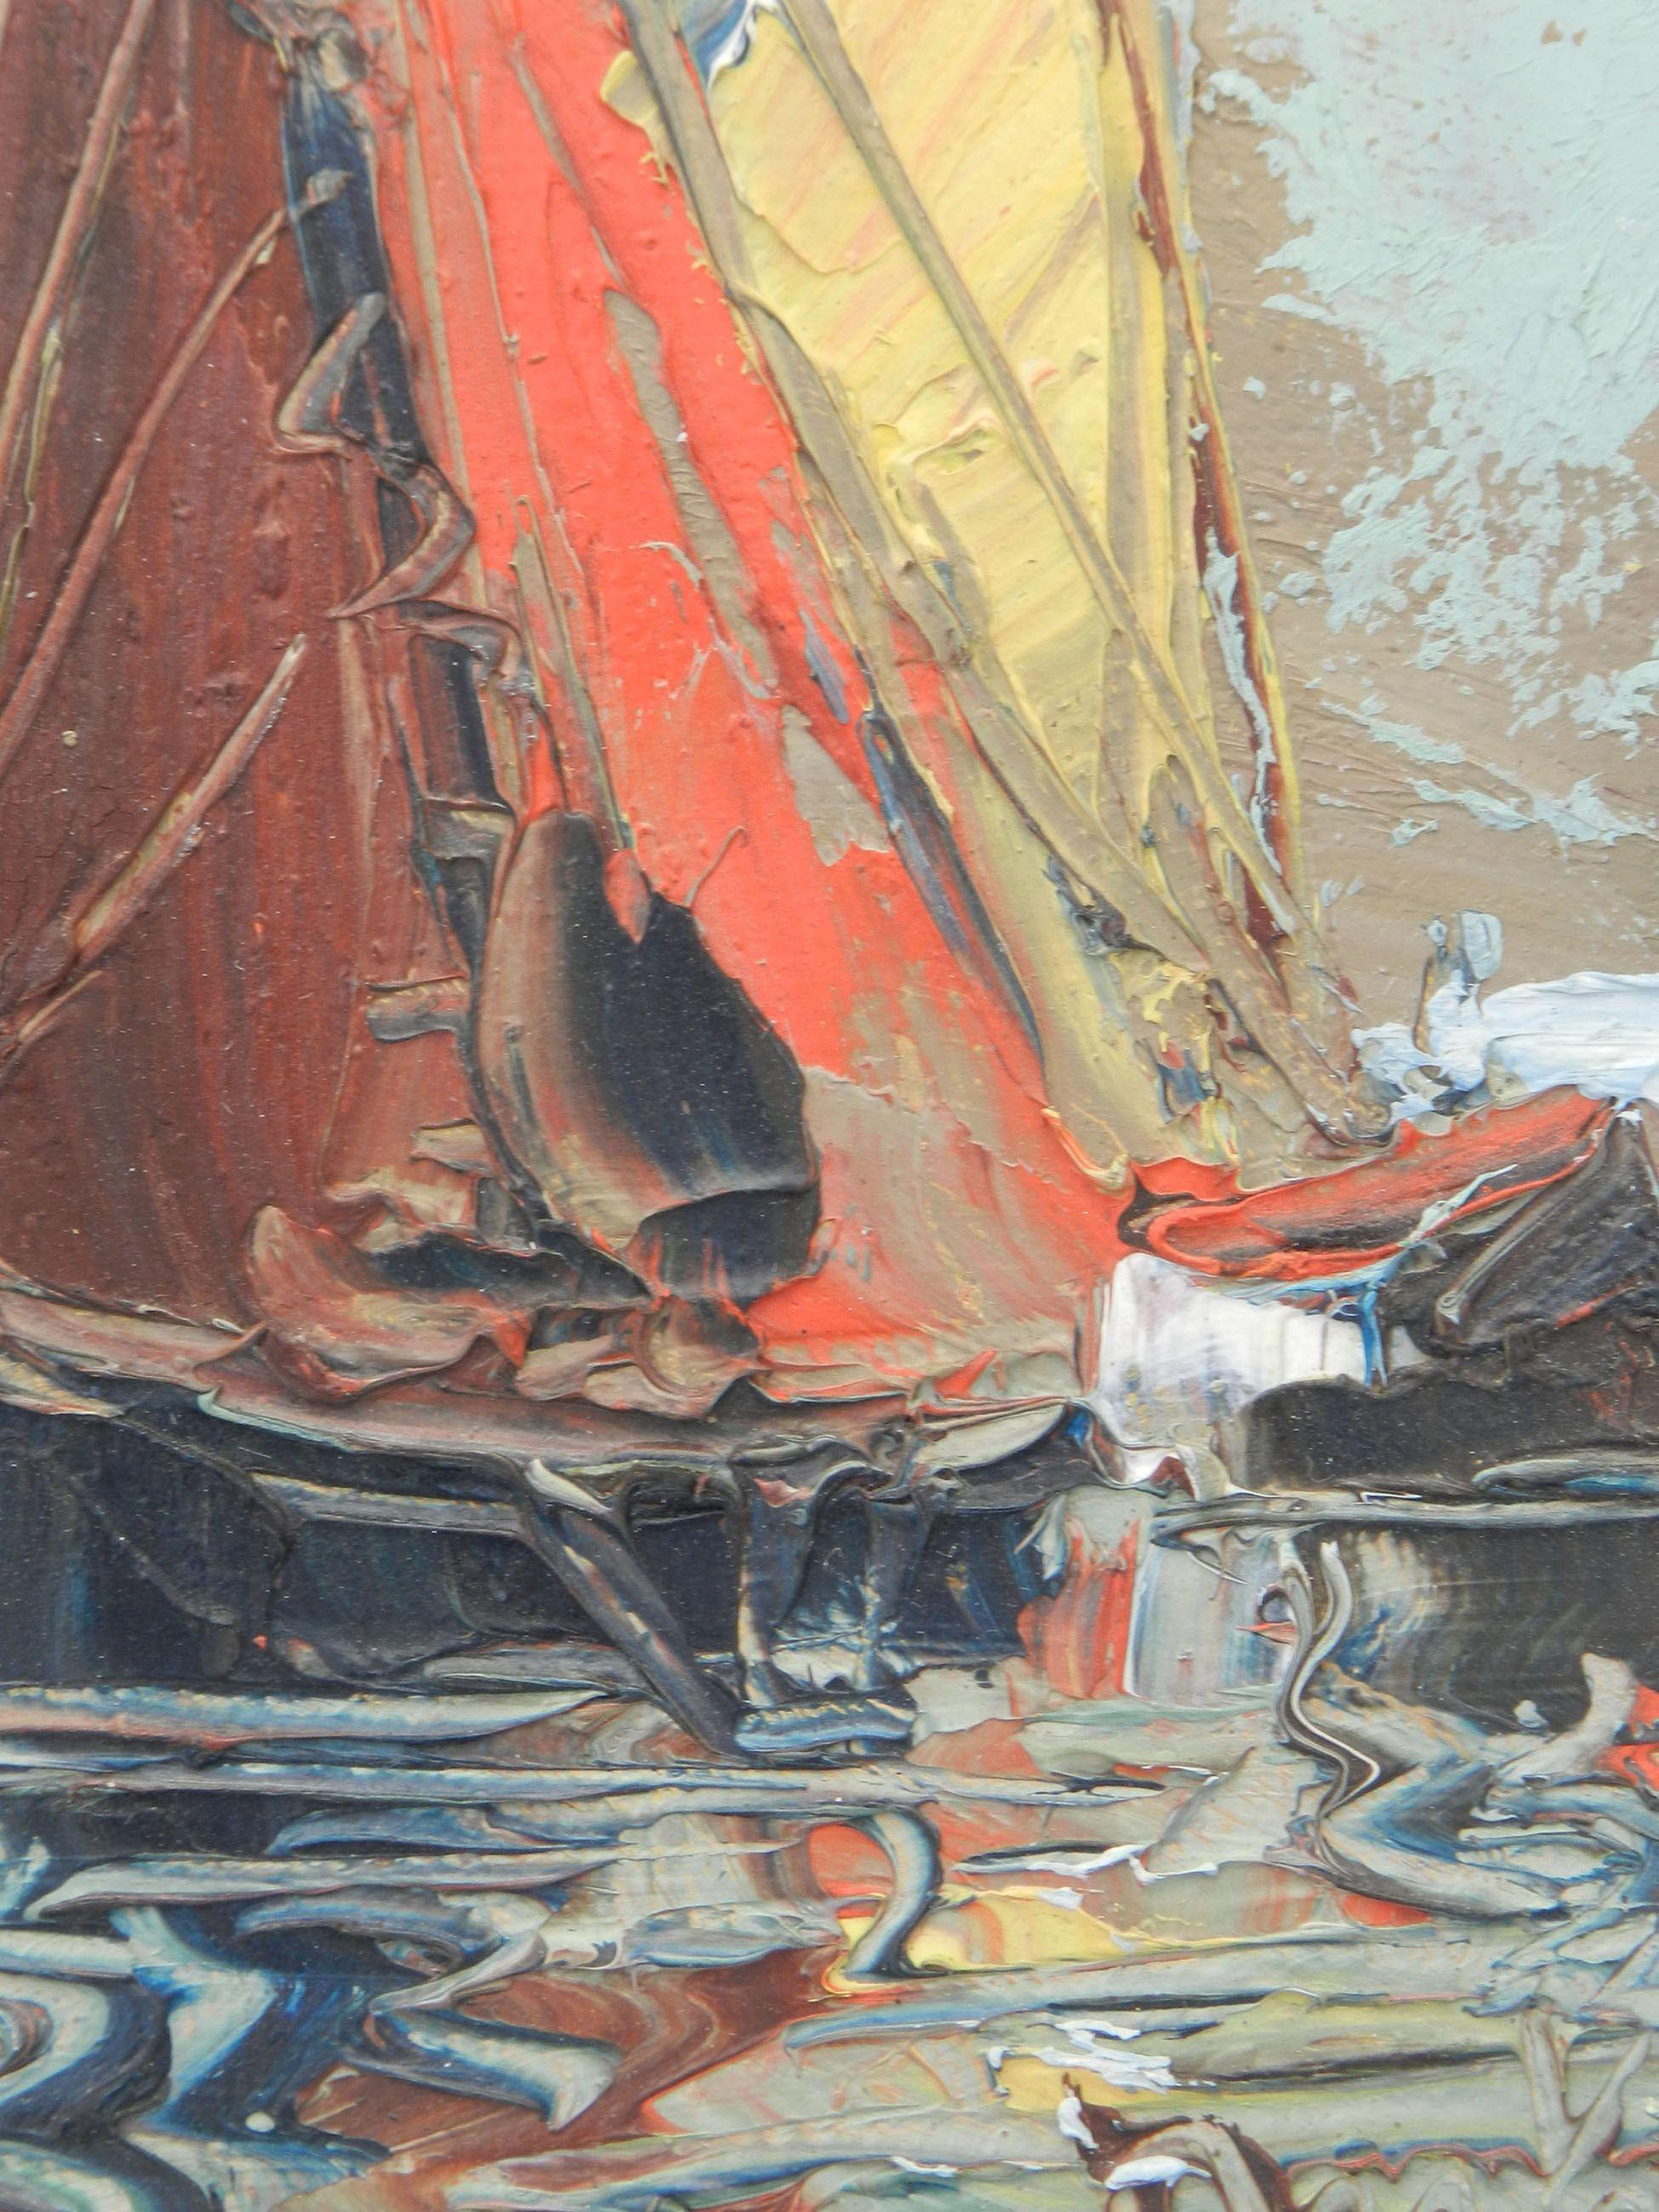 Spanish Yacht Oil Painting late 20th Century
Indistinctly signed
On a panel
This will be sent with it's frame painted very pale blue
Good vintage condition